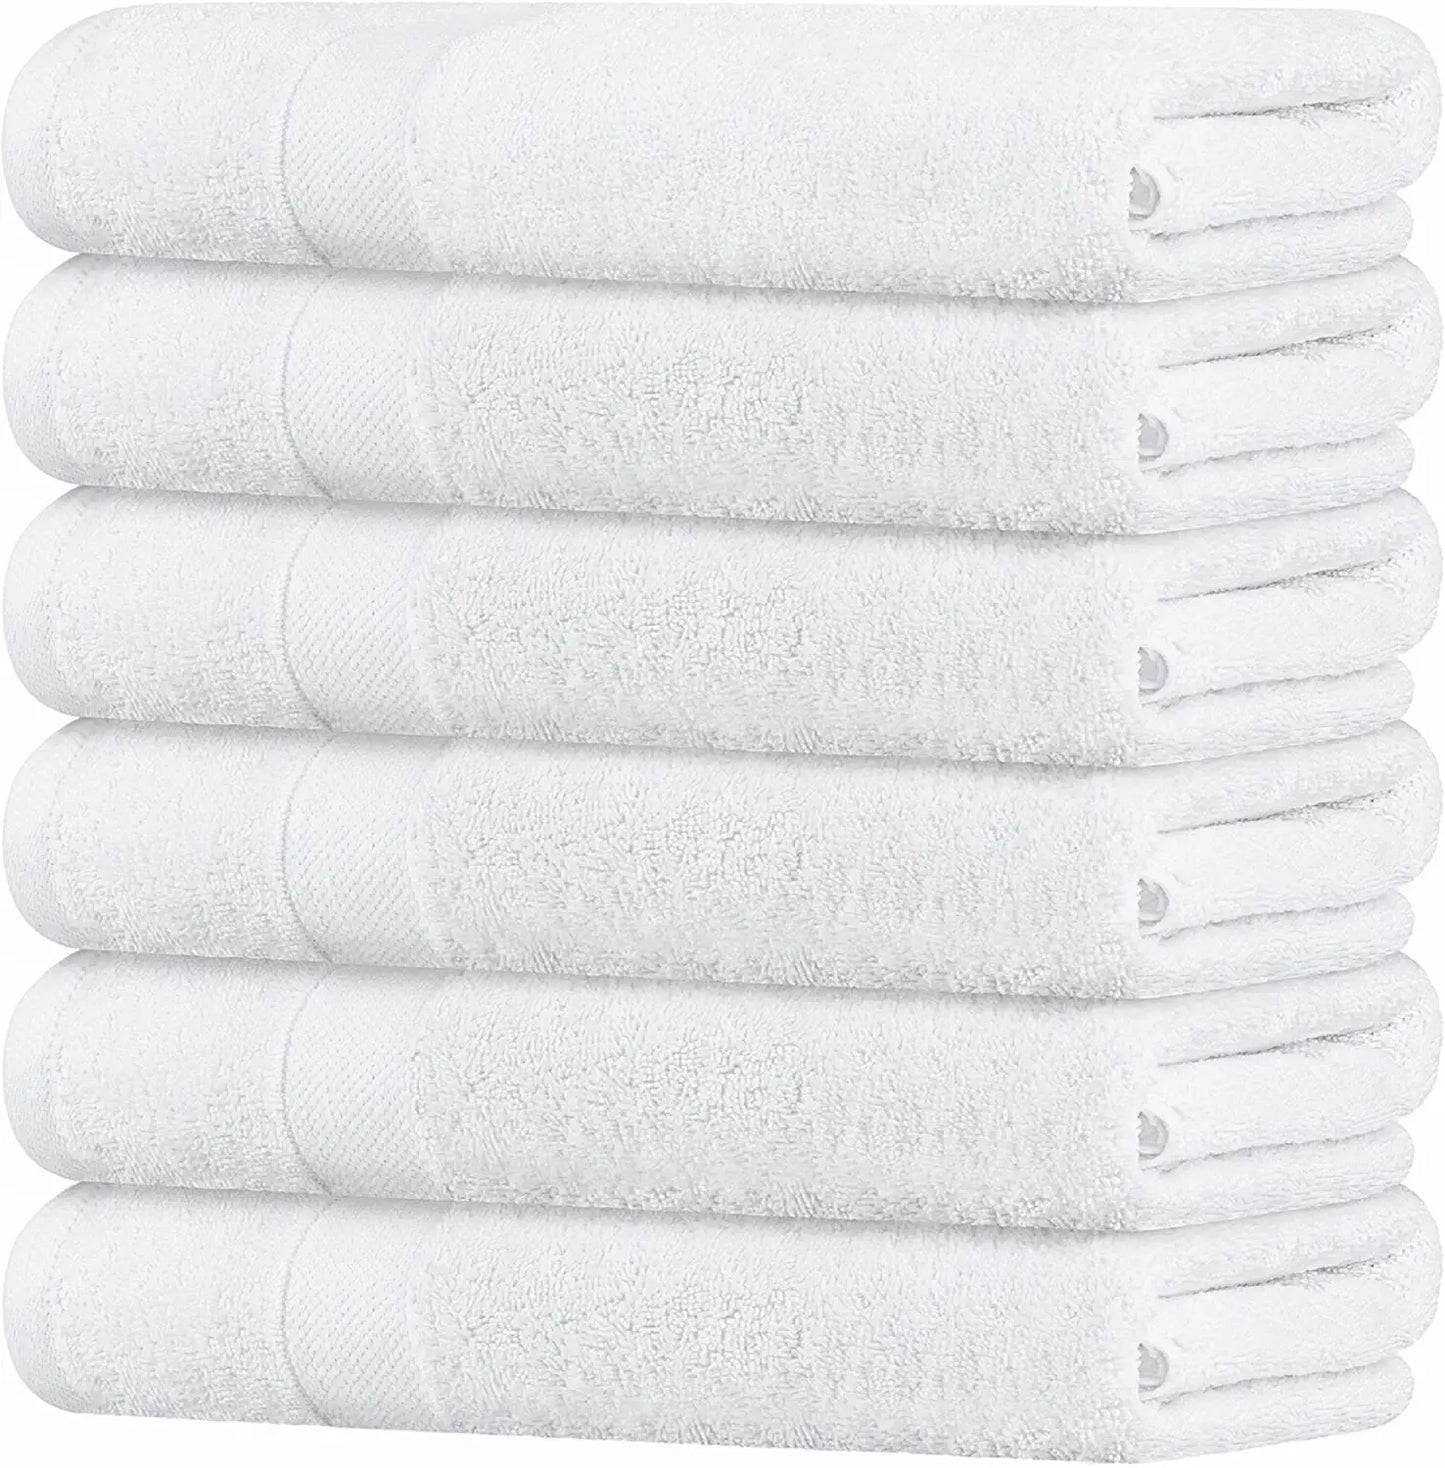 Wealuxe Cotton Bath Towels - 24x50 inch - Lightweight Soft and Absorbent Gym Pool Towel - 6 Pack - White